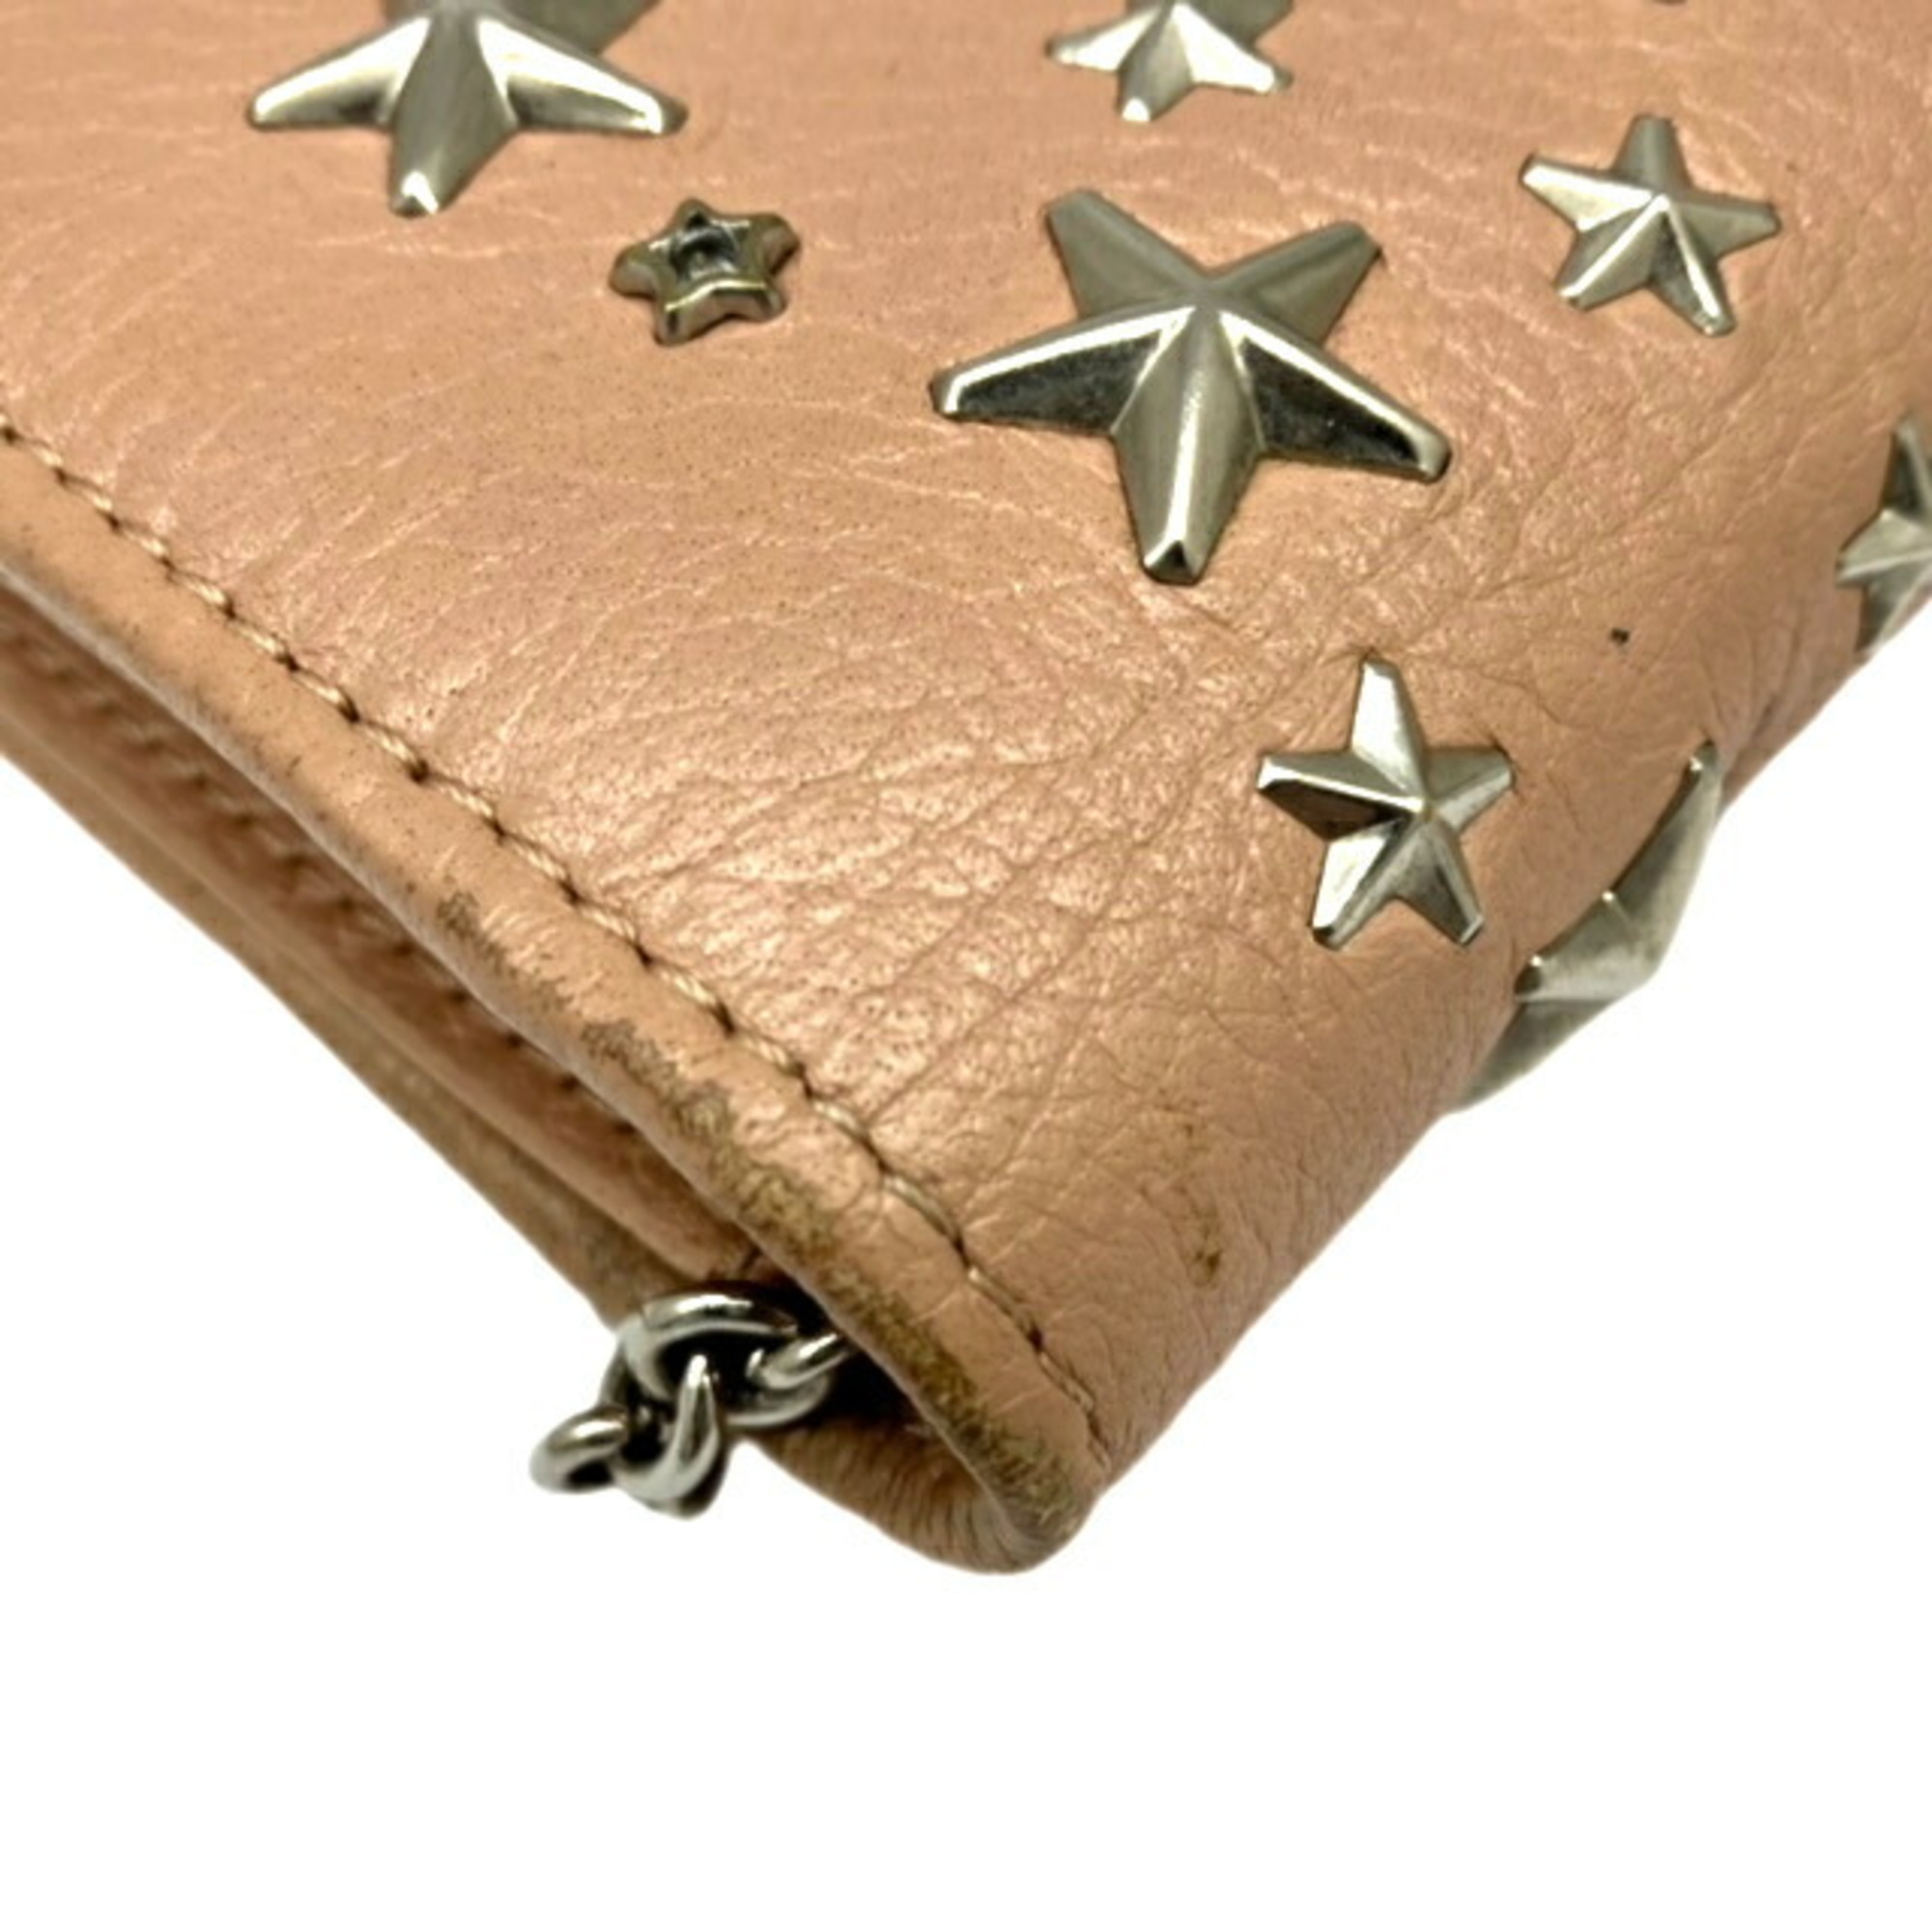 JIMMY CHOO Jimmy Choo Chain Wallet Star Studded Silver Pink Leather Shoulder L-shaped Flap Ladies